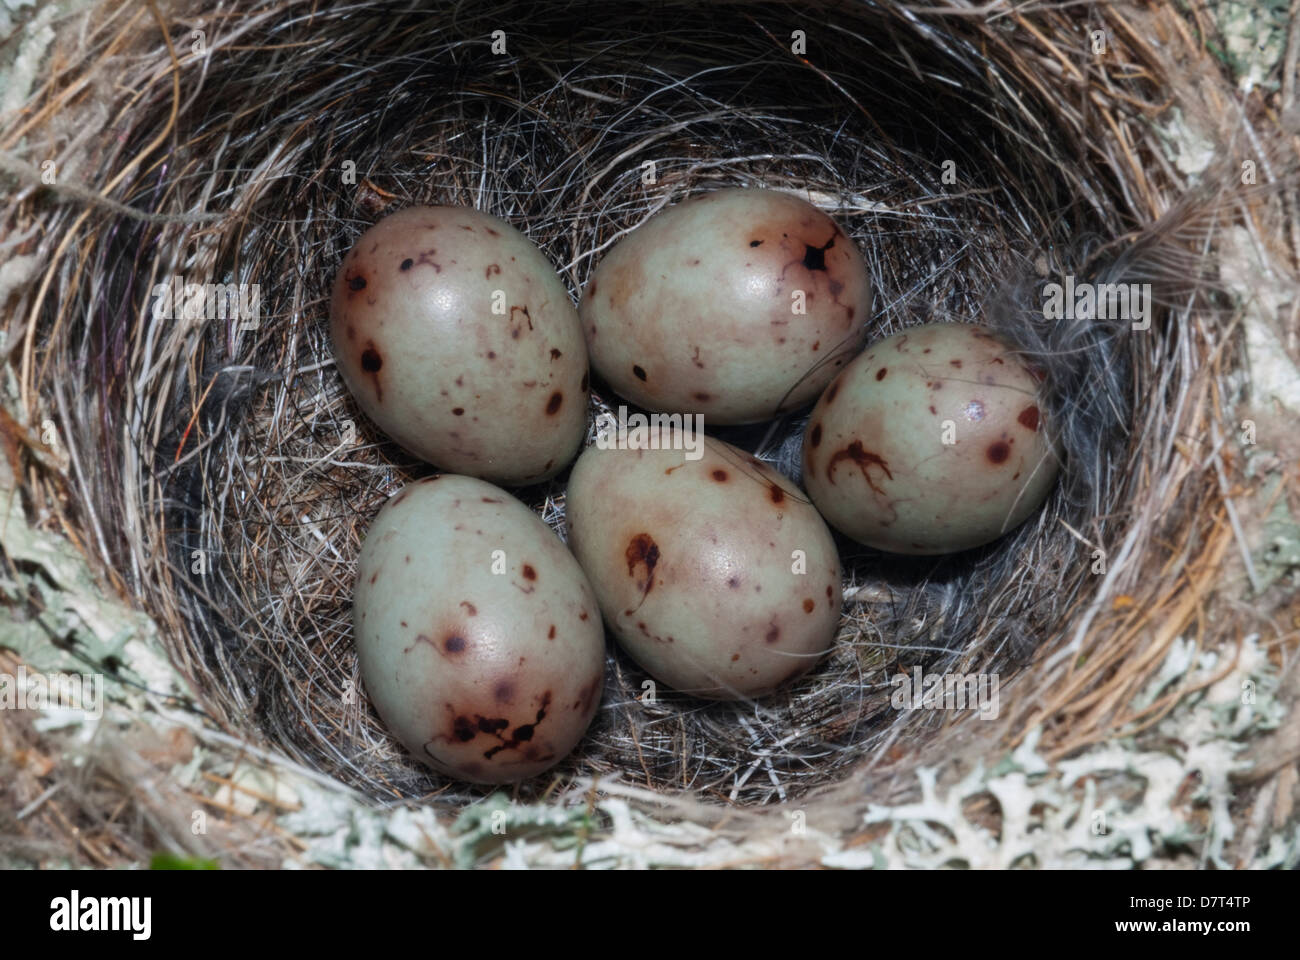 Chaffinch's bird nest with five eggs close-up. Stock Photo